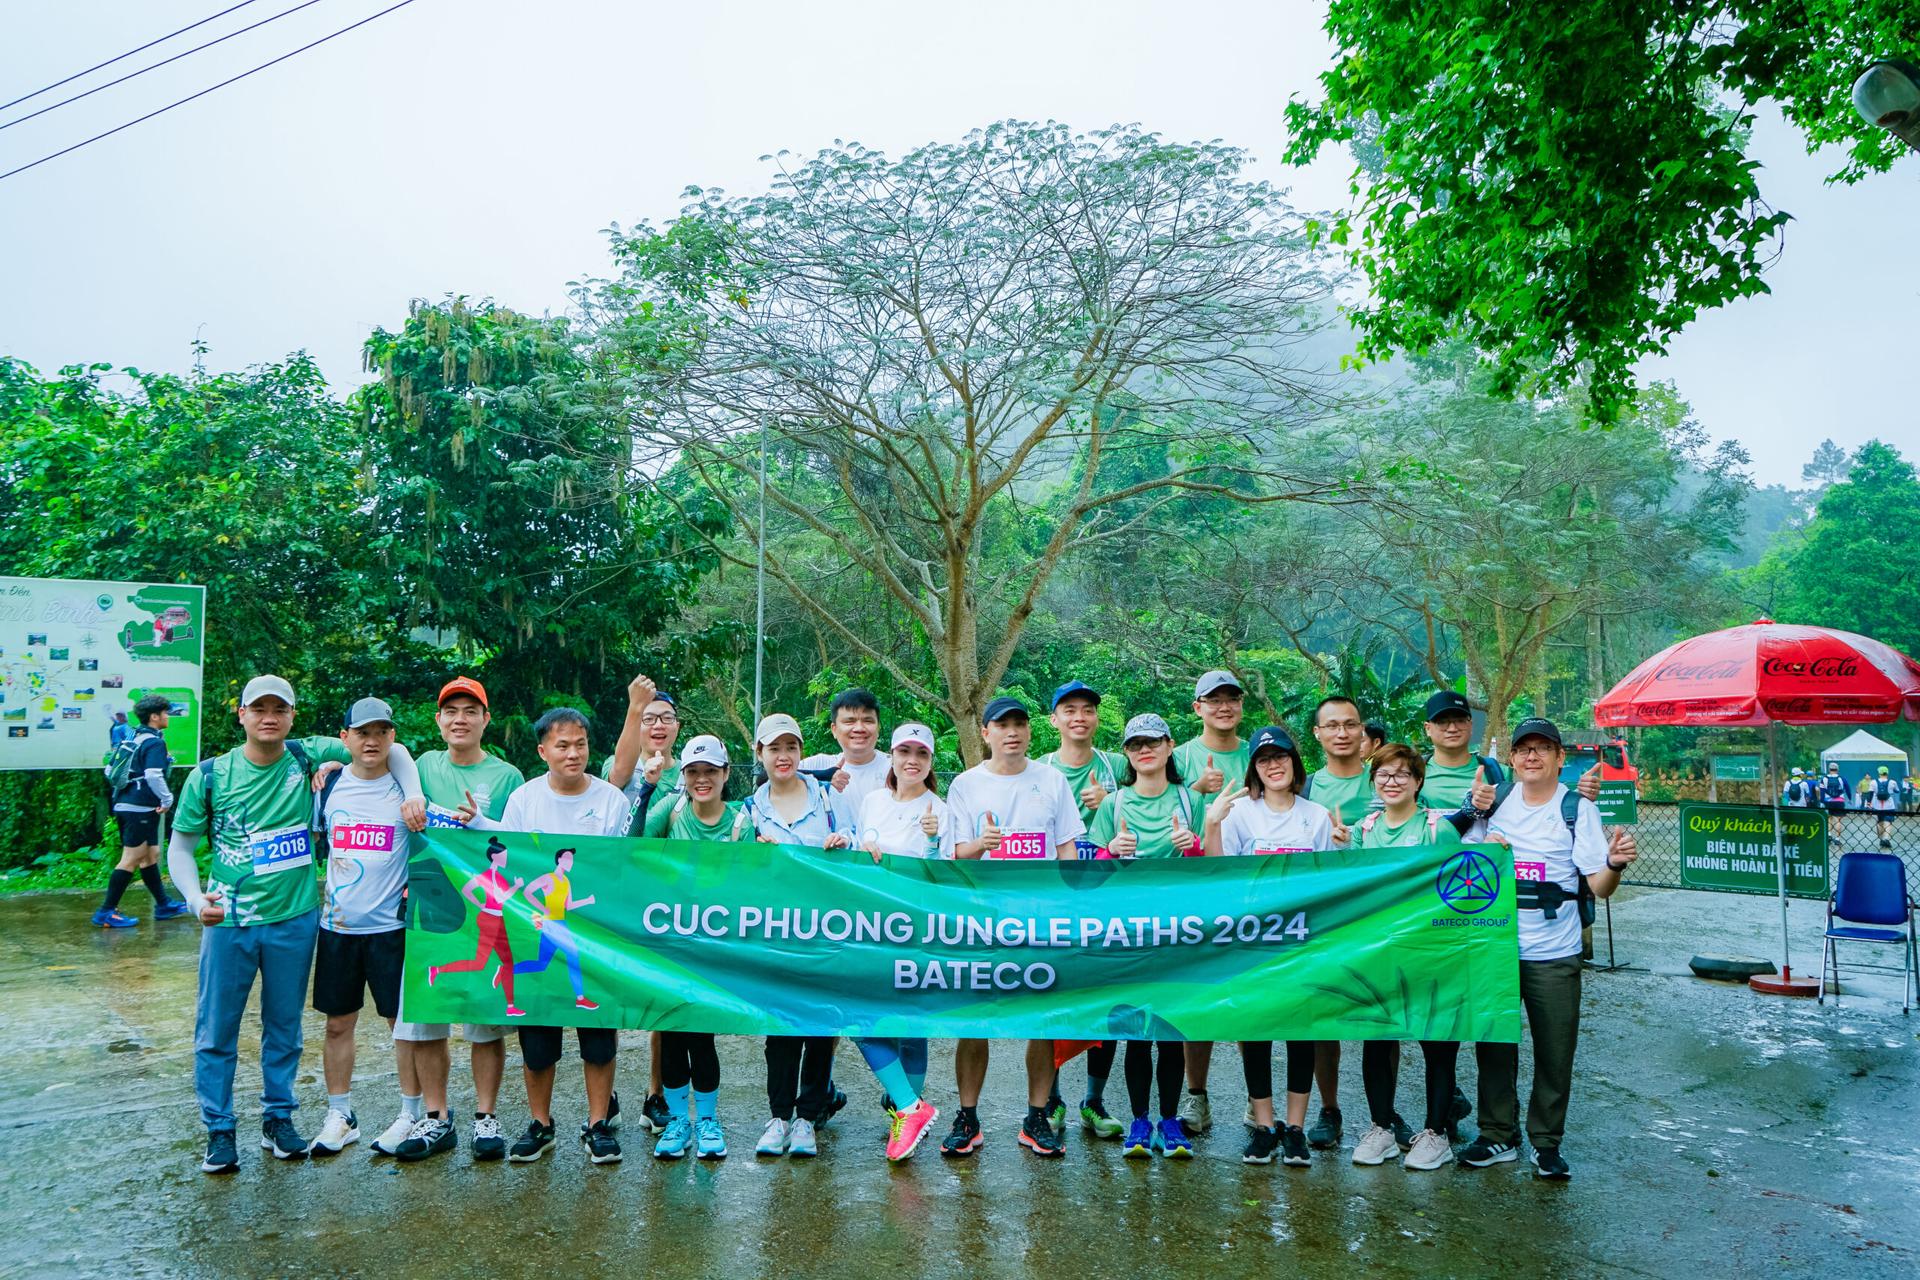 &#8220;Cuc Phuong Jungle Paths 2024&#8221; &#8211; More Than Just a Running Event